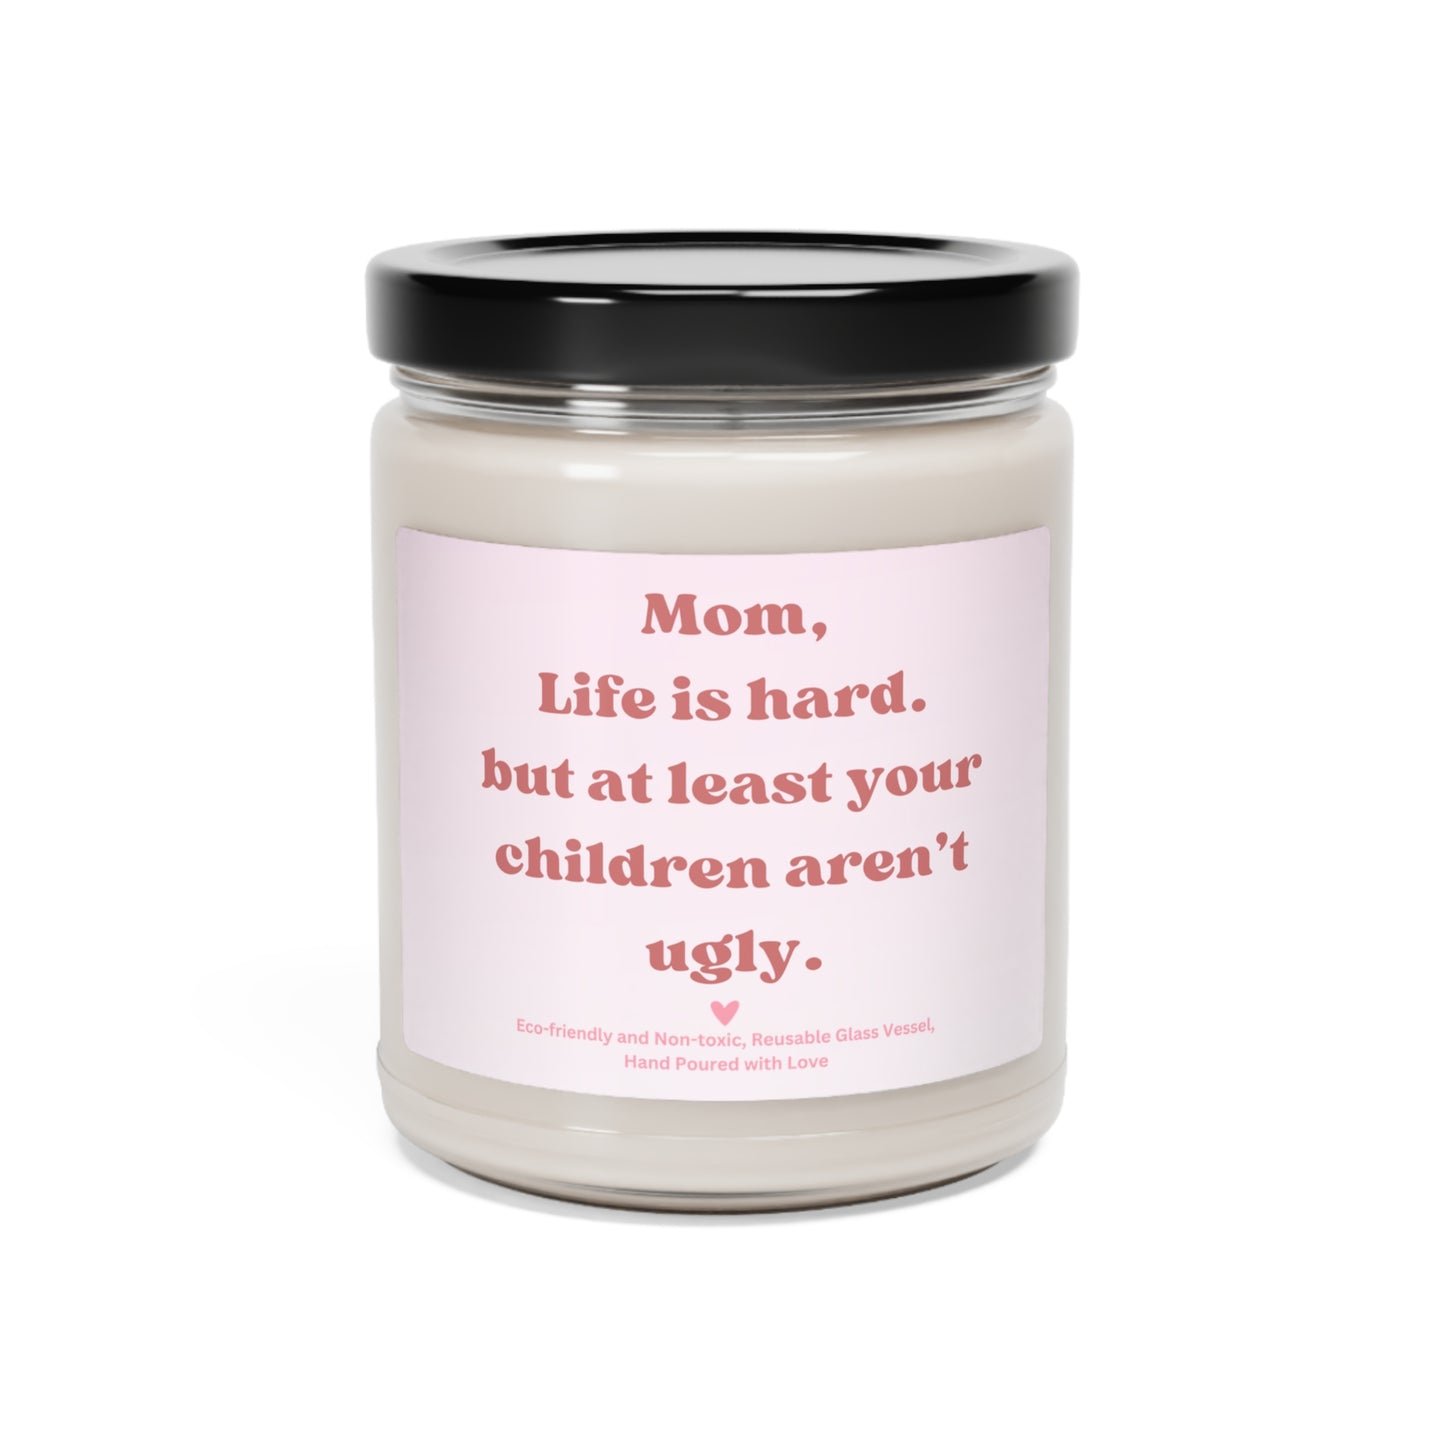 4.Scented Soy Candle, 9oz